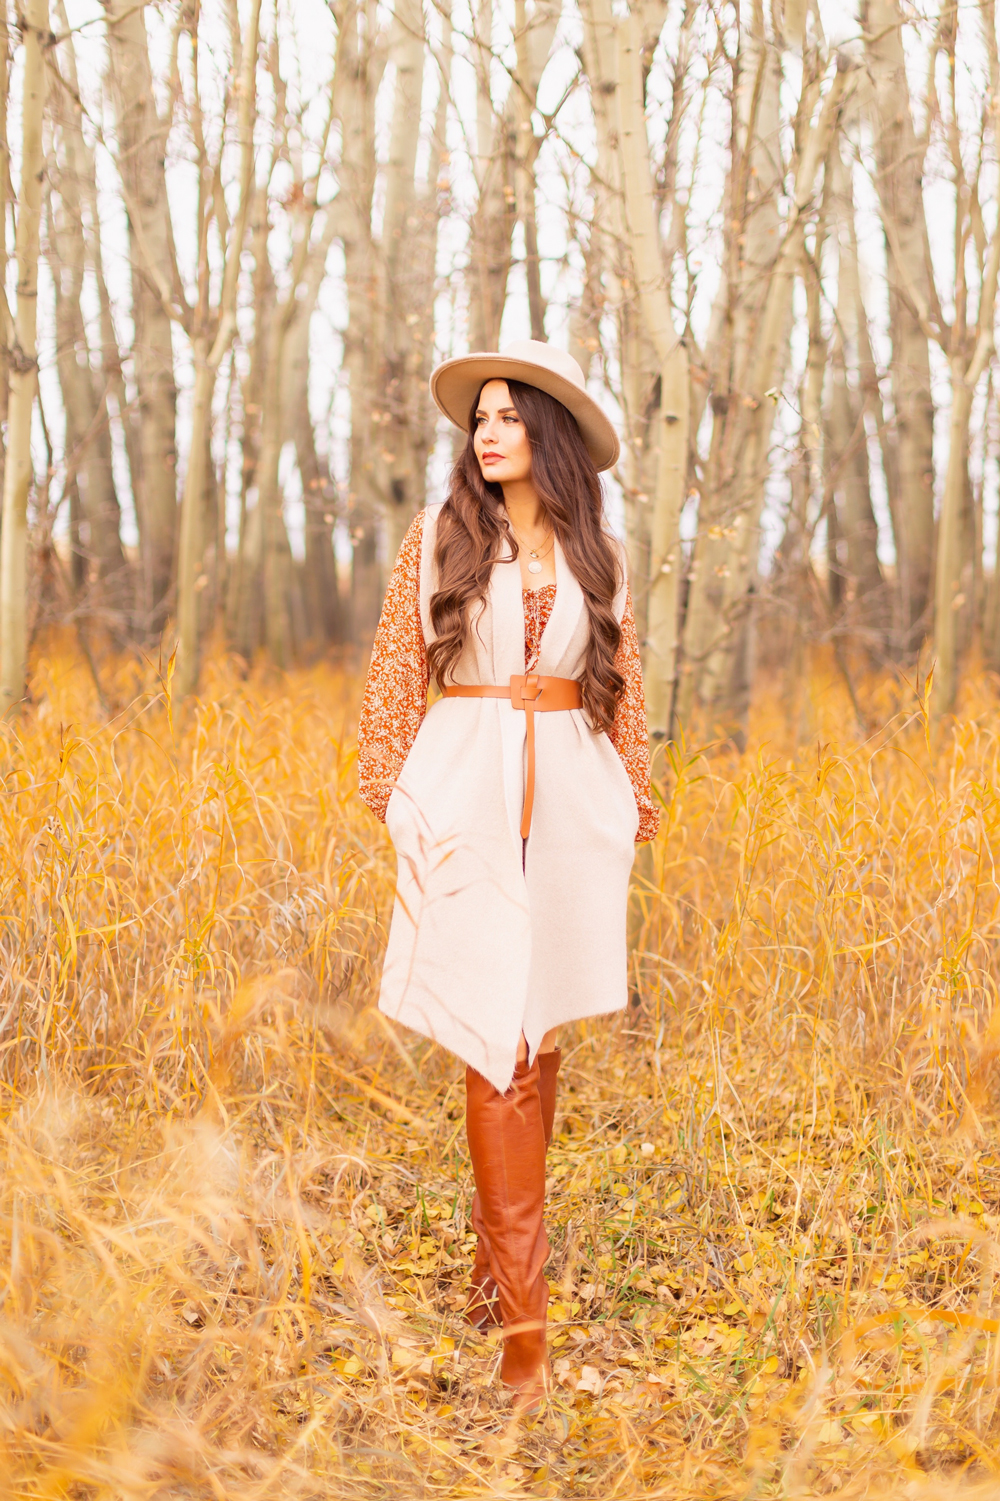 6 Luxe Bohemian Fall Outfits | Rancher Revival | Brunette woman wearing an orange floral mini dress, beige Pink Martini Stockport Vest, wide cognac waist belt with tie detail, a crossbody cognac suede saddle bag and Lucky Brand Whiskey Azoola Leather Boot amoungst golden grasses and bare trees | Boho Fall 2022 Outfit Ideas | Classic Fall Outfit Formulas | Feminine Bohemian Style | Bohemian Outfit Ideas | How to Style a Rancher Hat | Calgary Alberta Fashion Blogger // JustineCelina.com